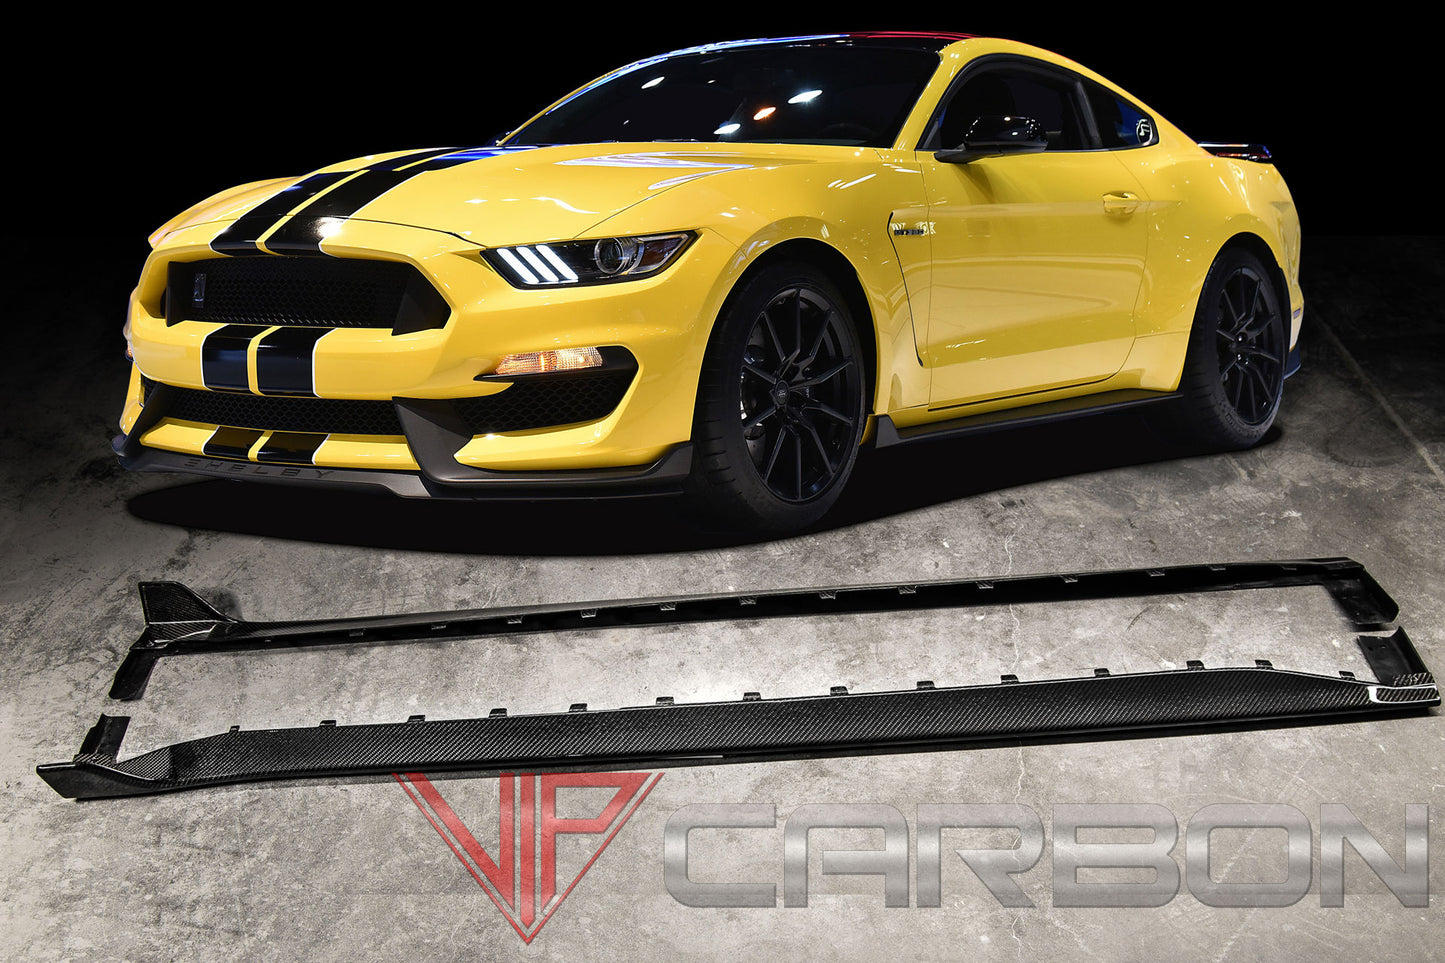 Carbon Fiber GT350 Side Skirts Ford Mustang Shelby 2015-2018 by California Super Coupes